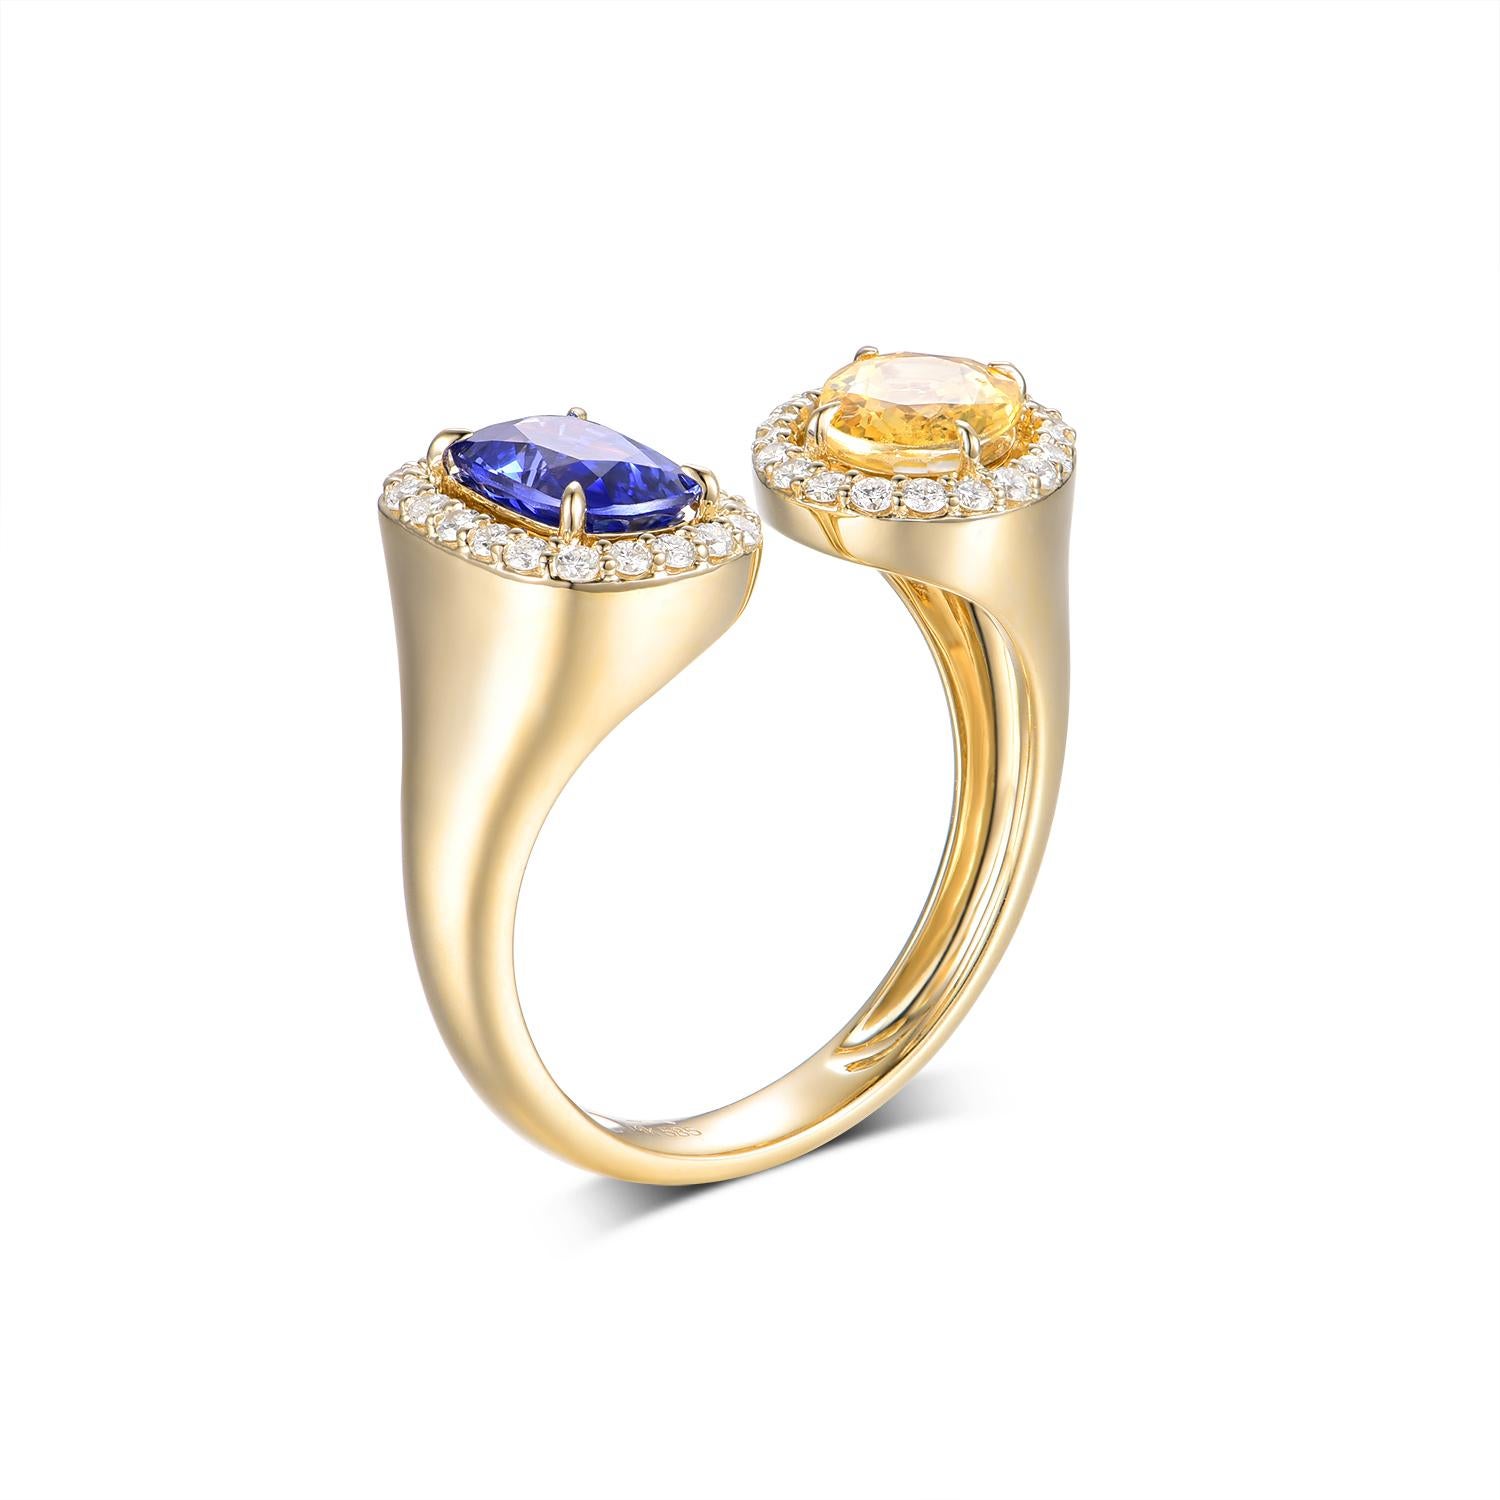 Embrace sophistication with this elegant ring, showcasing a stunning 2.31-carat sapphire, framed by a halo of 40 diamonds set in timeless 14-karat yellow gold. The central sapphire exudes a royal blue radiance, offering depth and clarity that